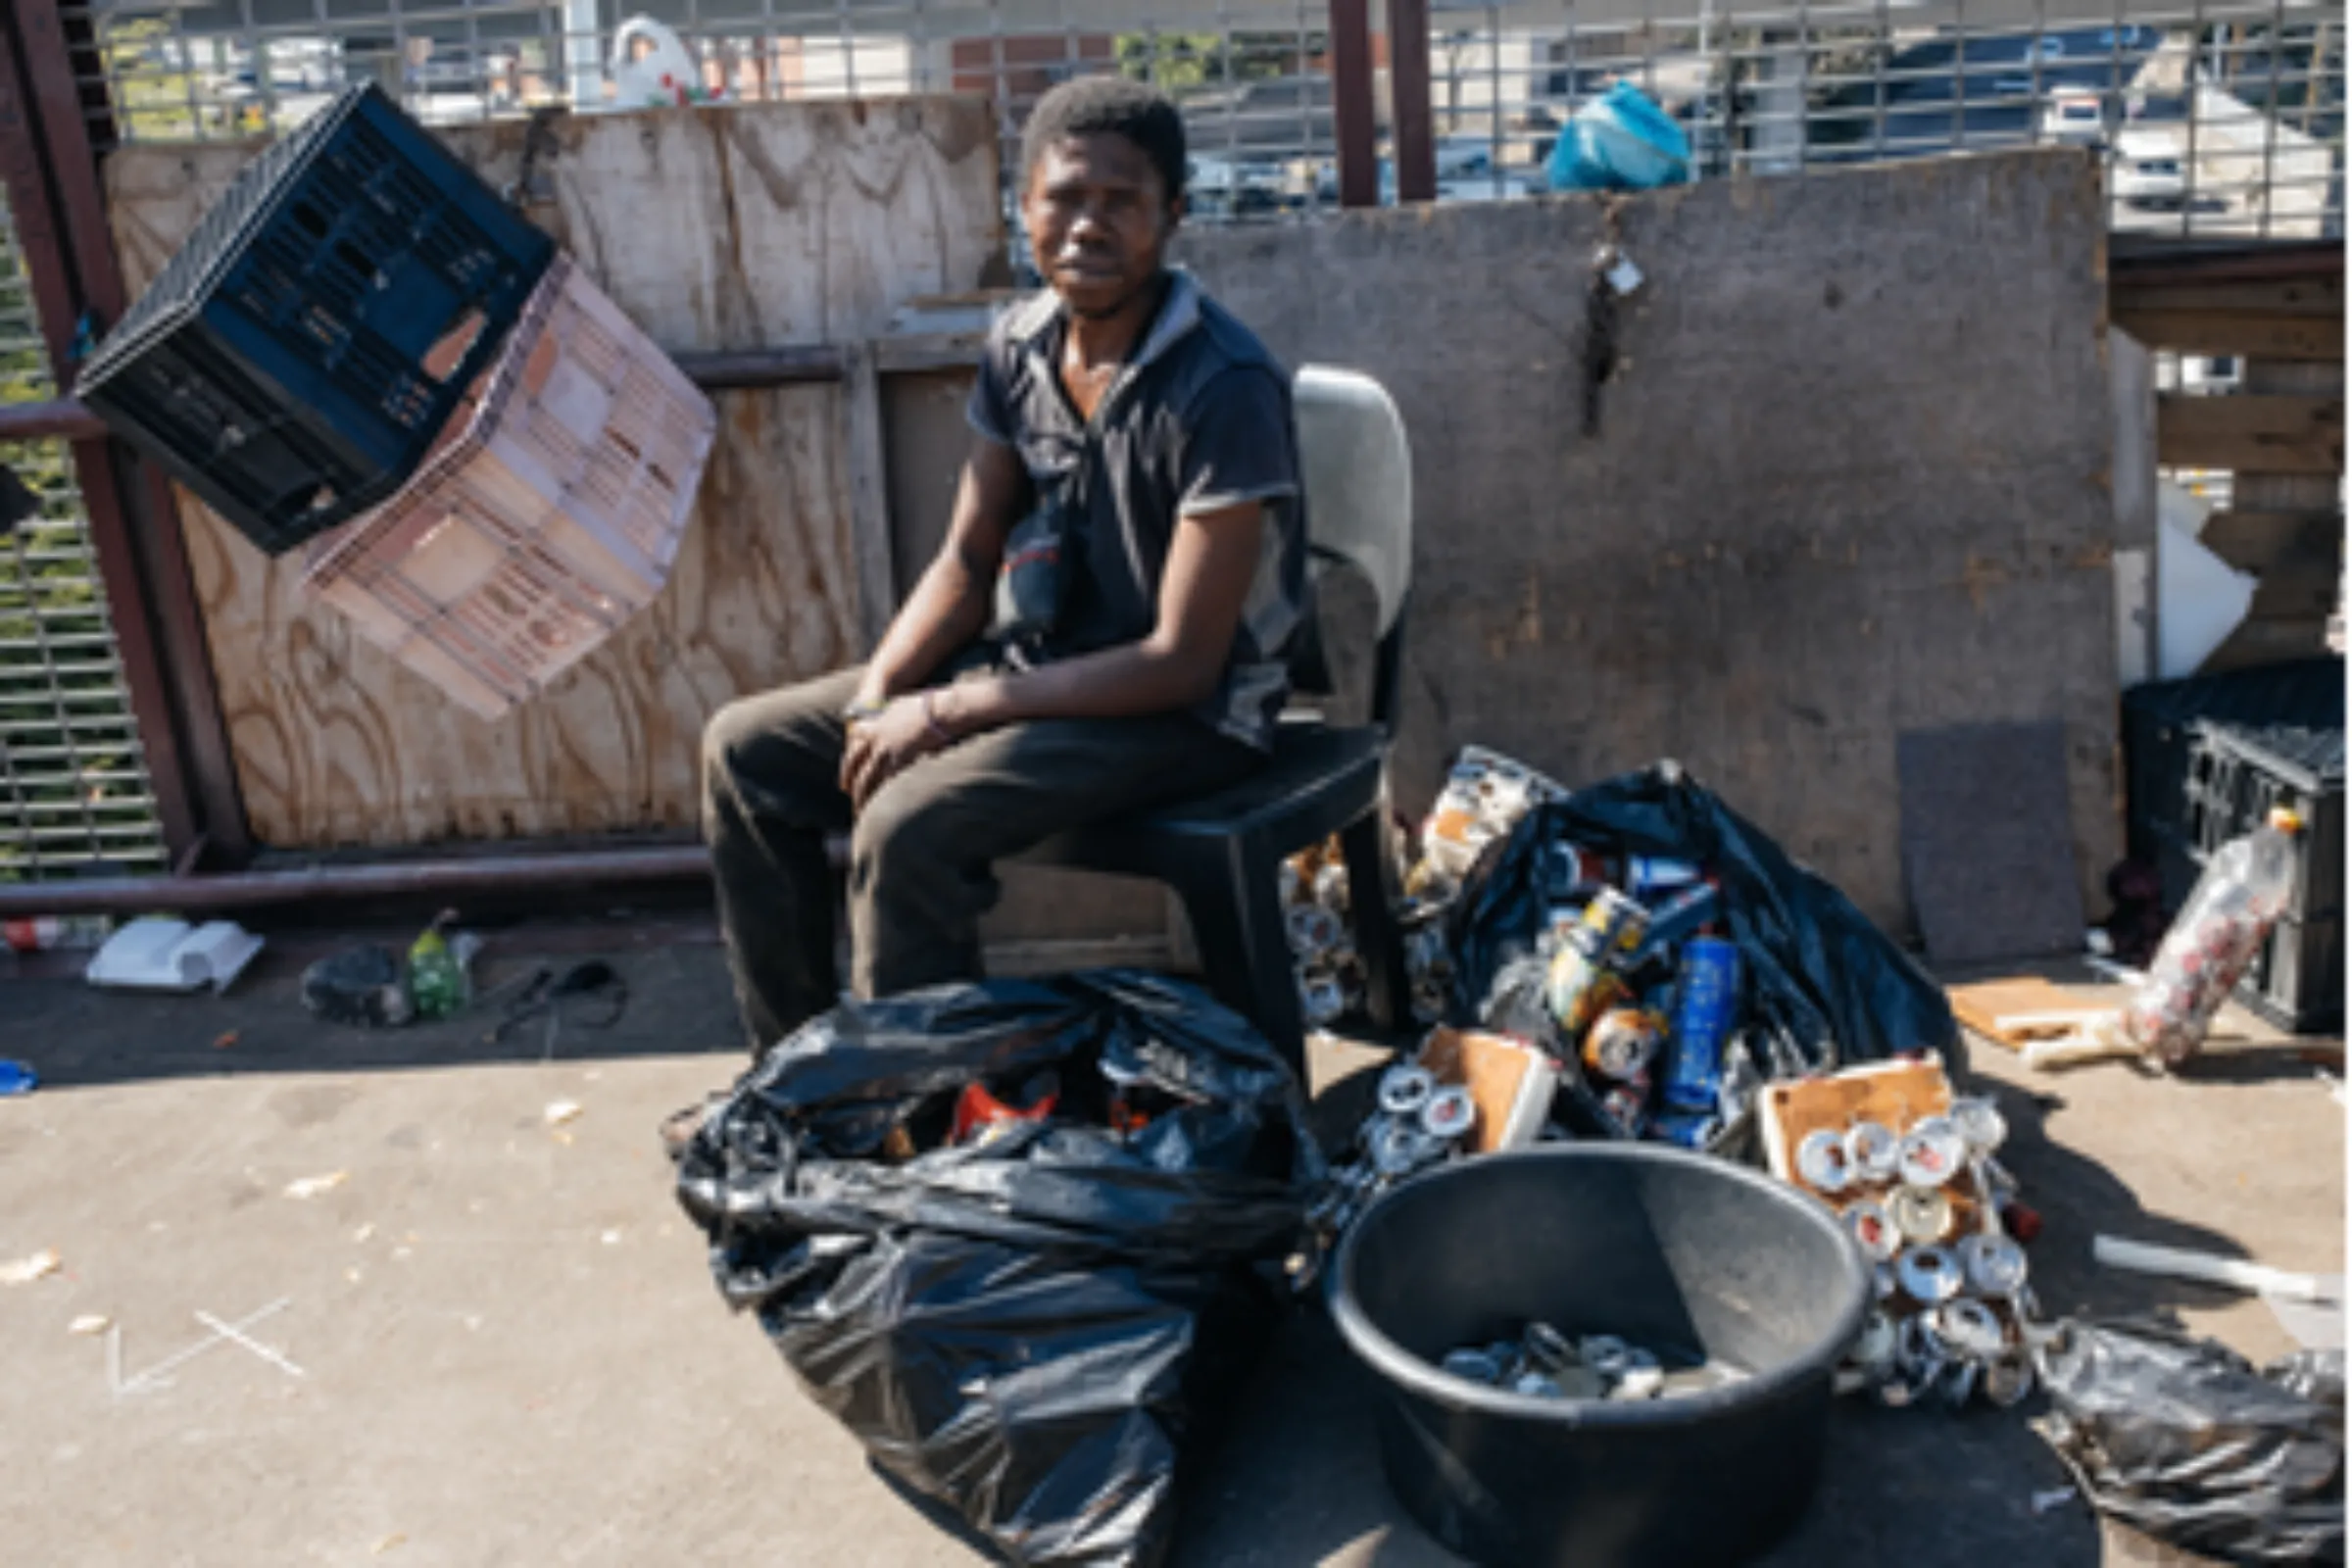 Waste picker Lethukuthula Mnguni, 26, collects cans and cardboard at the Warwick Market in Durban, South Africa, March 31, 2021. Although not formally recognised, Durban's waste pickers help curb climate change by recycling a greater share of the city’s waste. Thomson Reuters Foundation/James Puttick